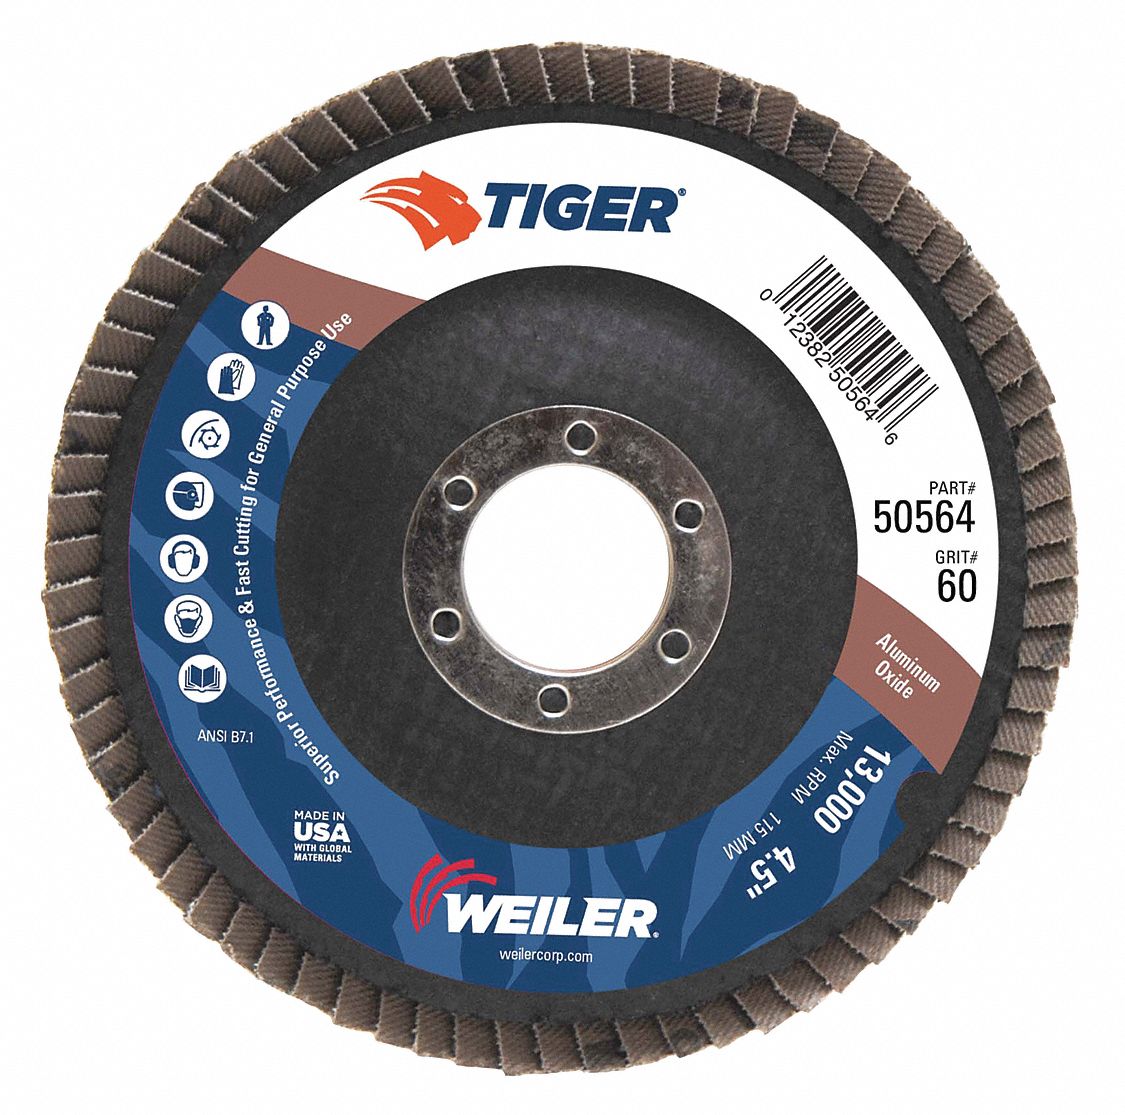 38P565 - 4-1/2In. Tiger Disc Abrasive Flap Disc - Only Shipped in Quantities of 10